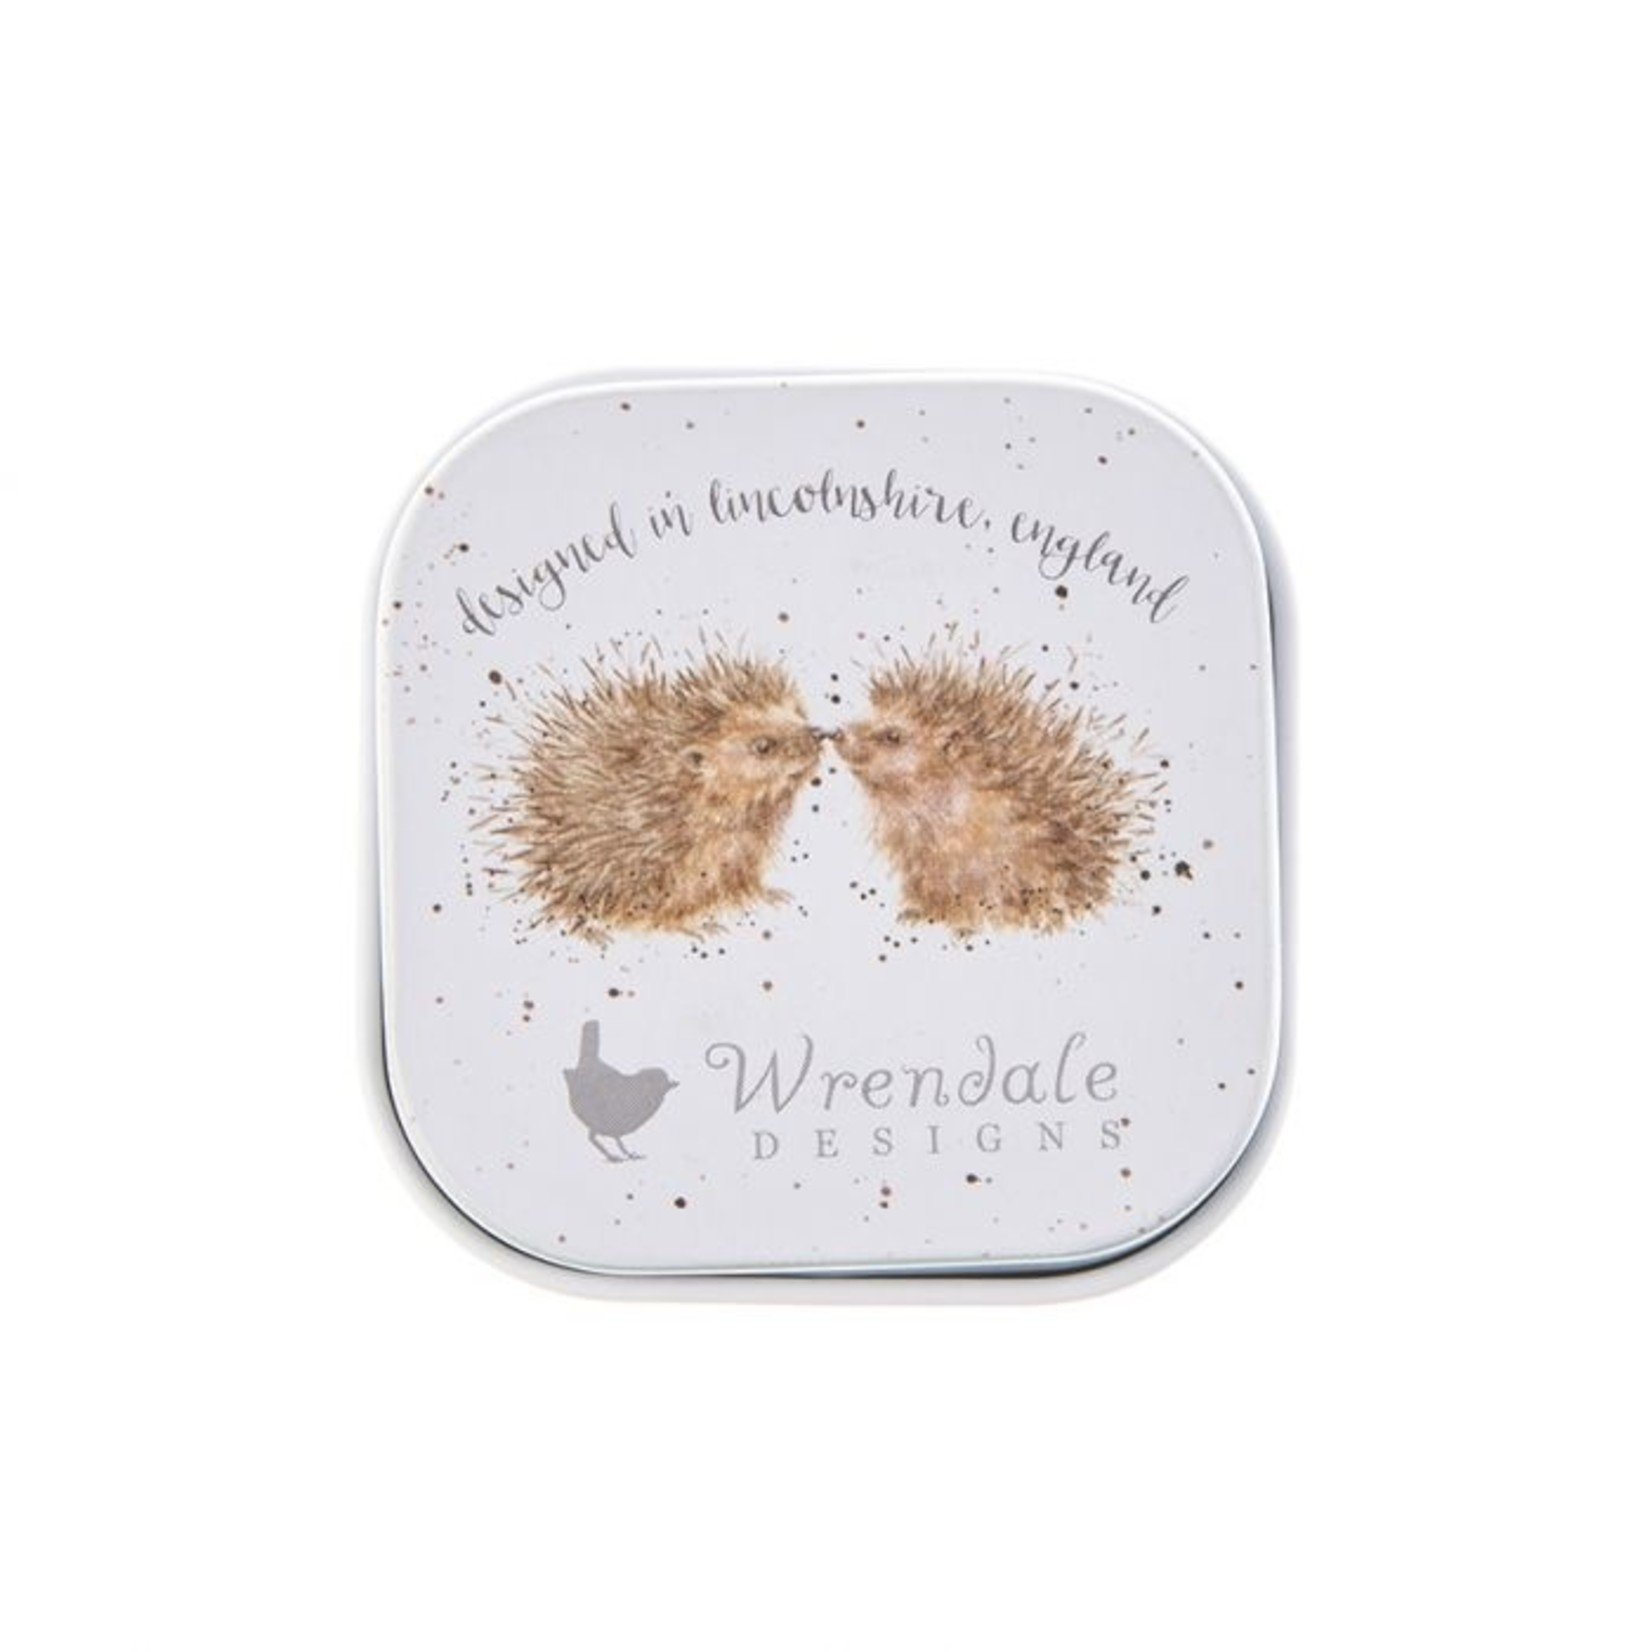 Wrendale Design Lip Balm Busy as a Bee Honig / Vanille